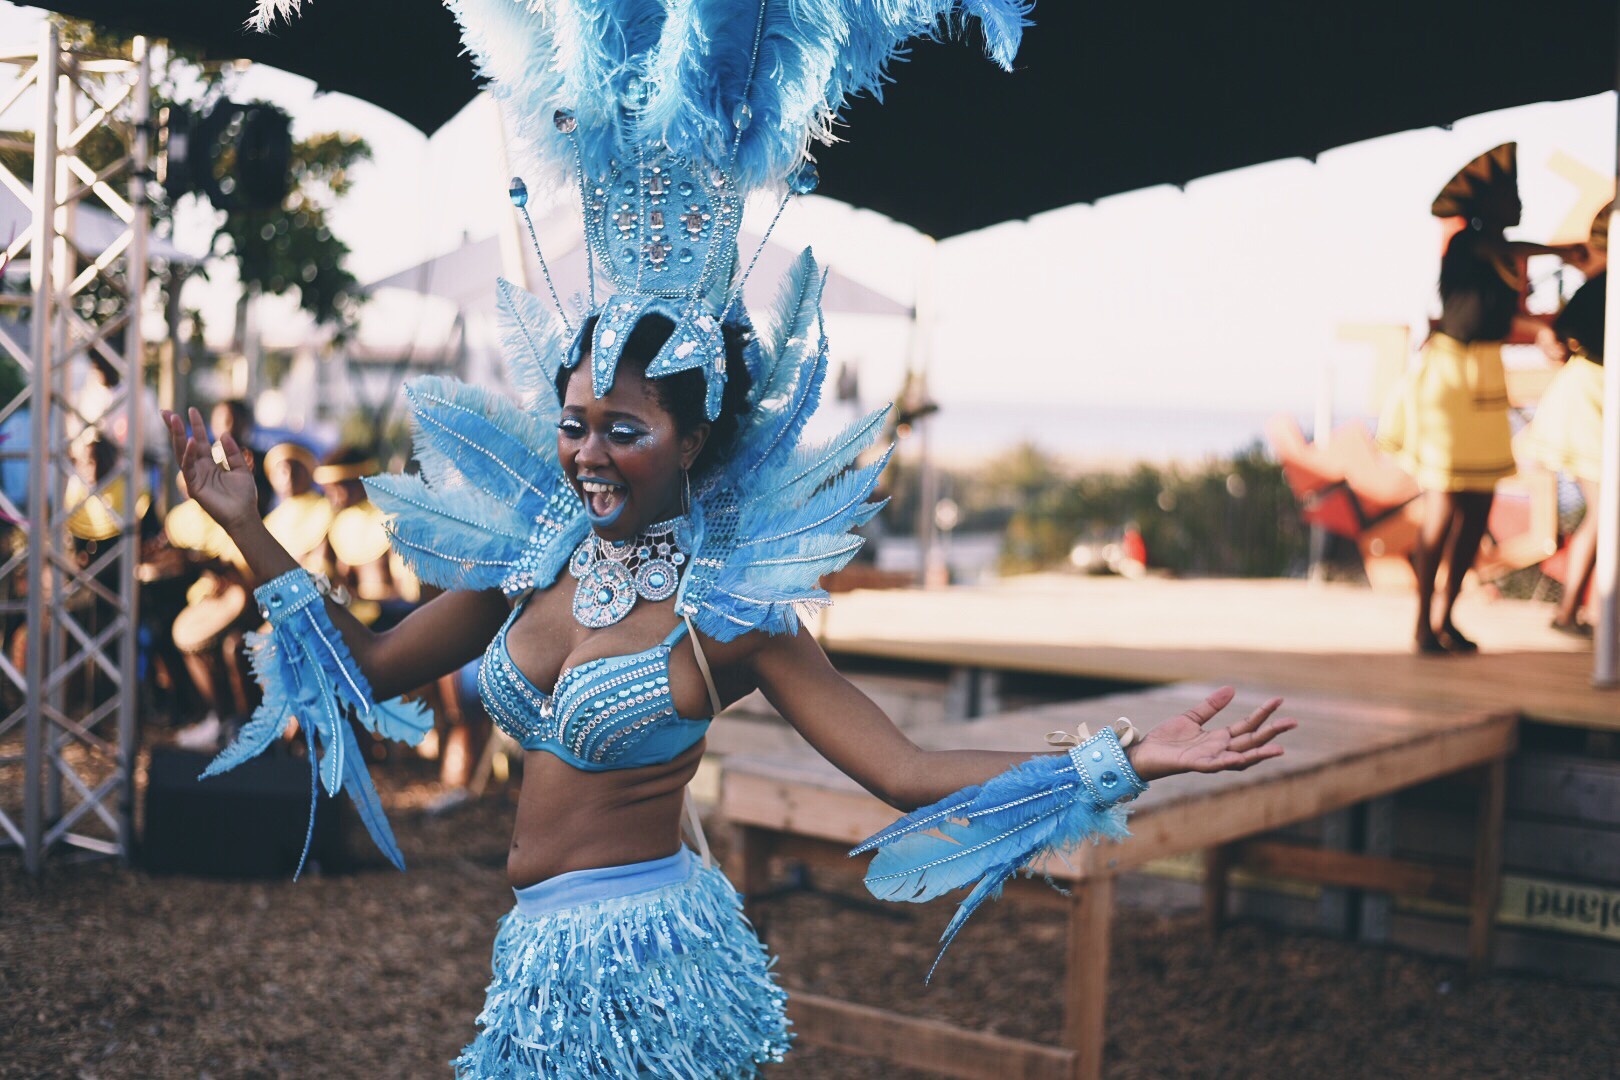 CAPE TOWN CARNIVAL CHANGES LIVES FOR THE BETTER